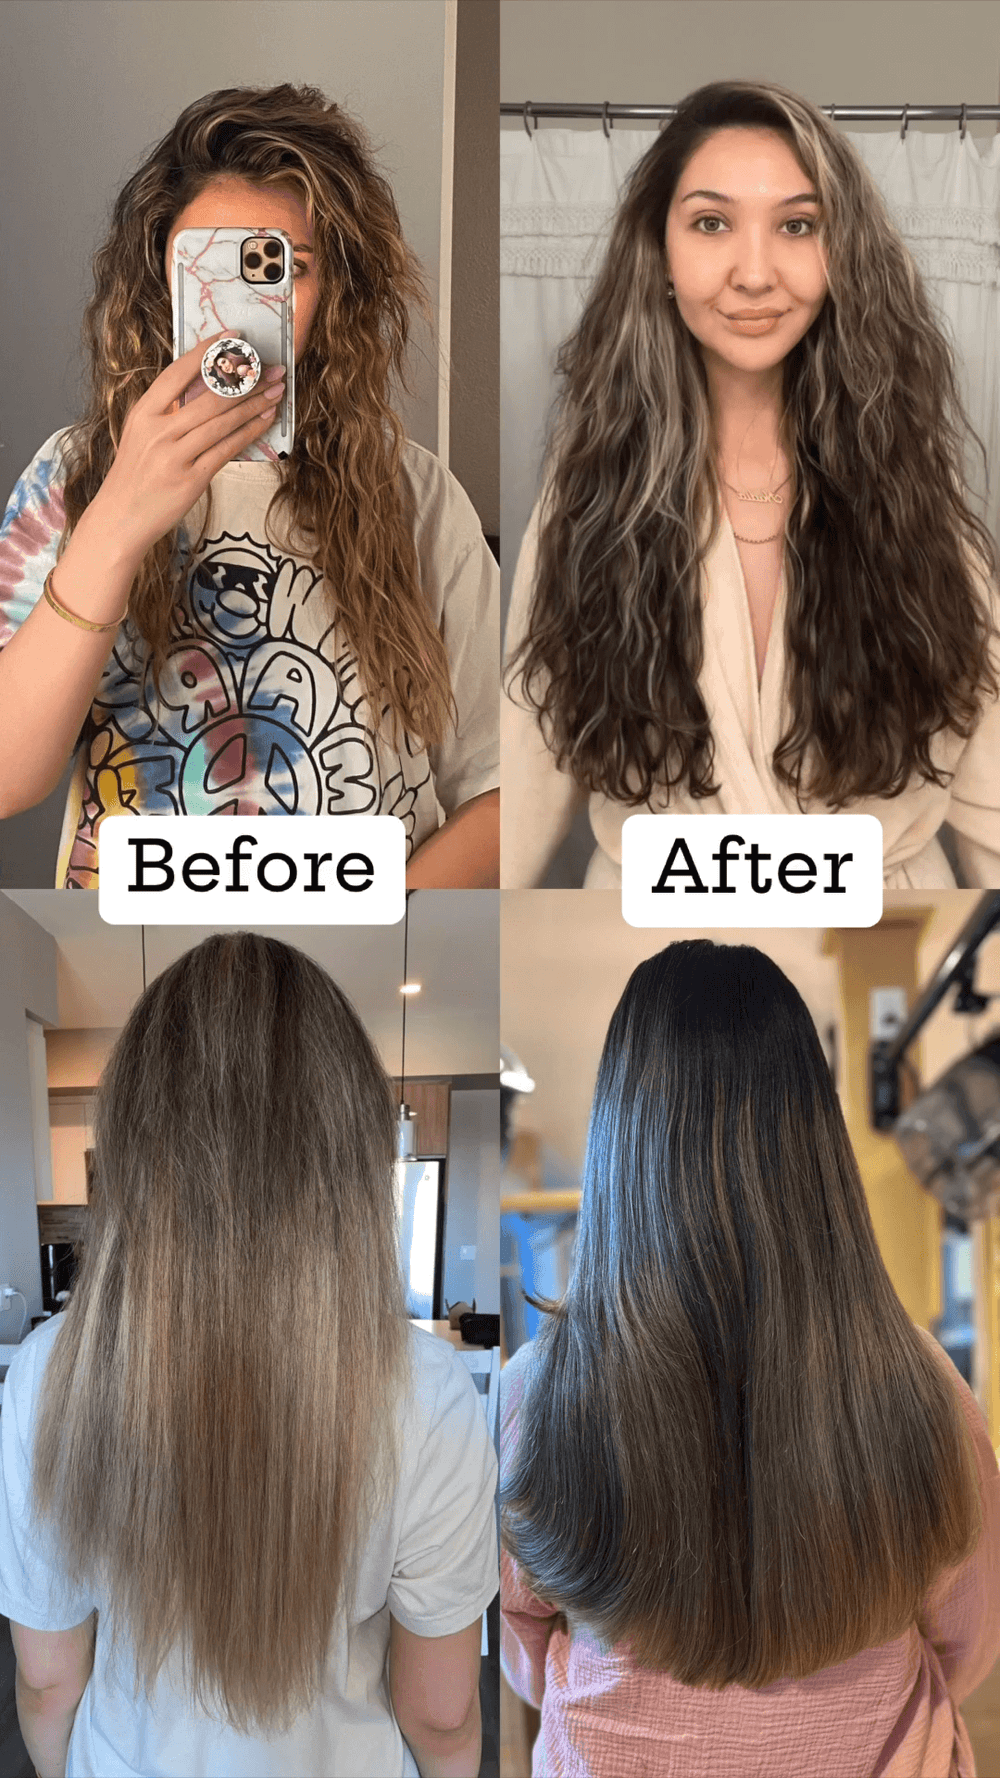 Here's the Proof: Hair Before and After a Jolie Shower Filter